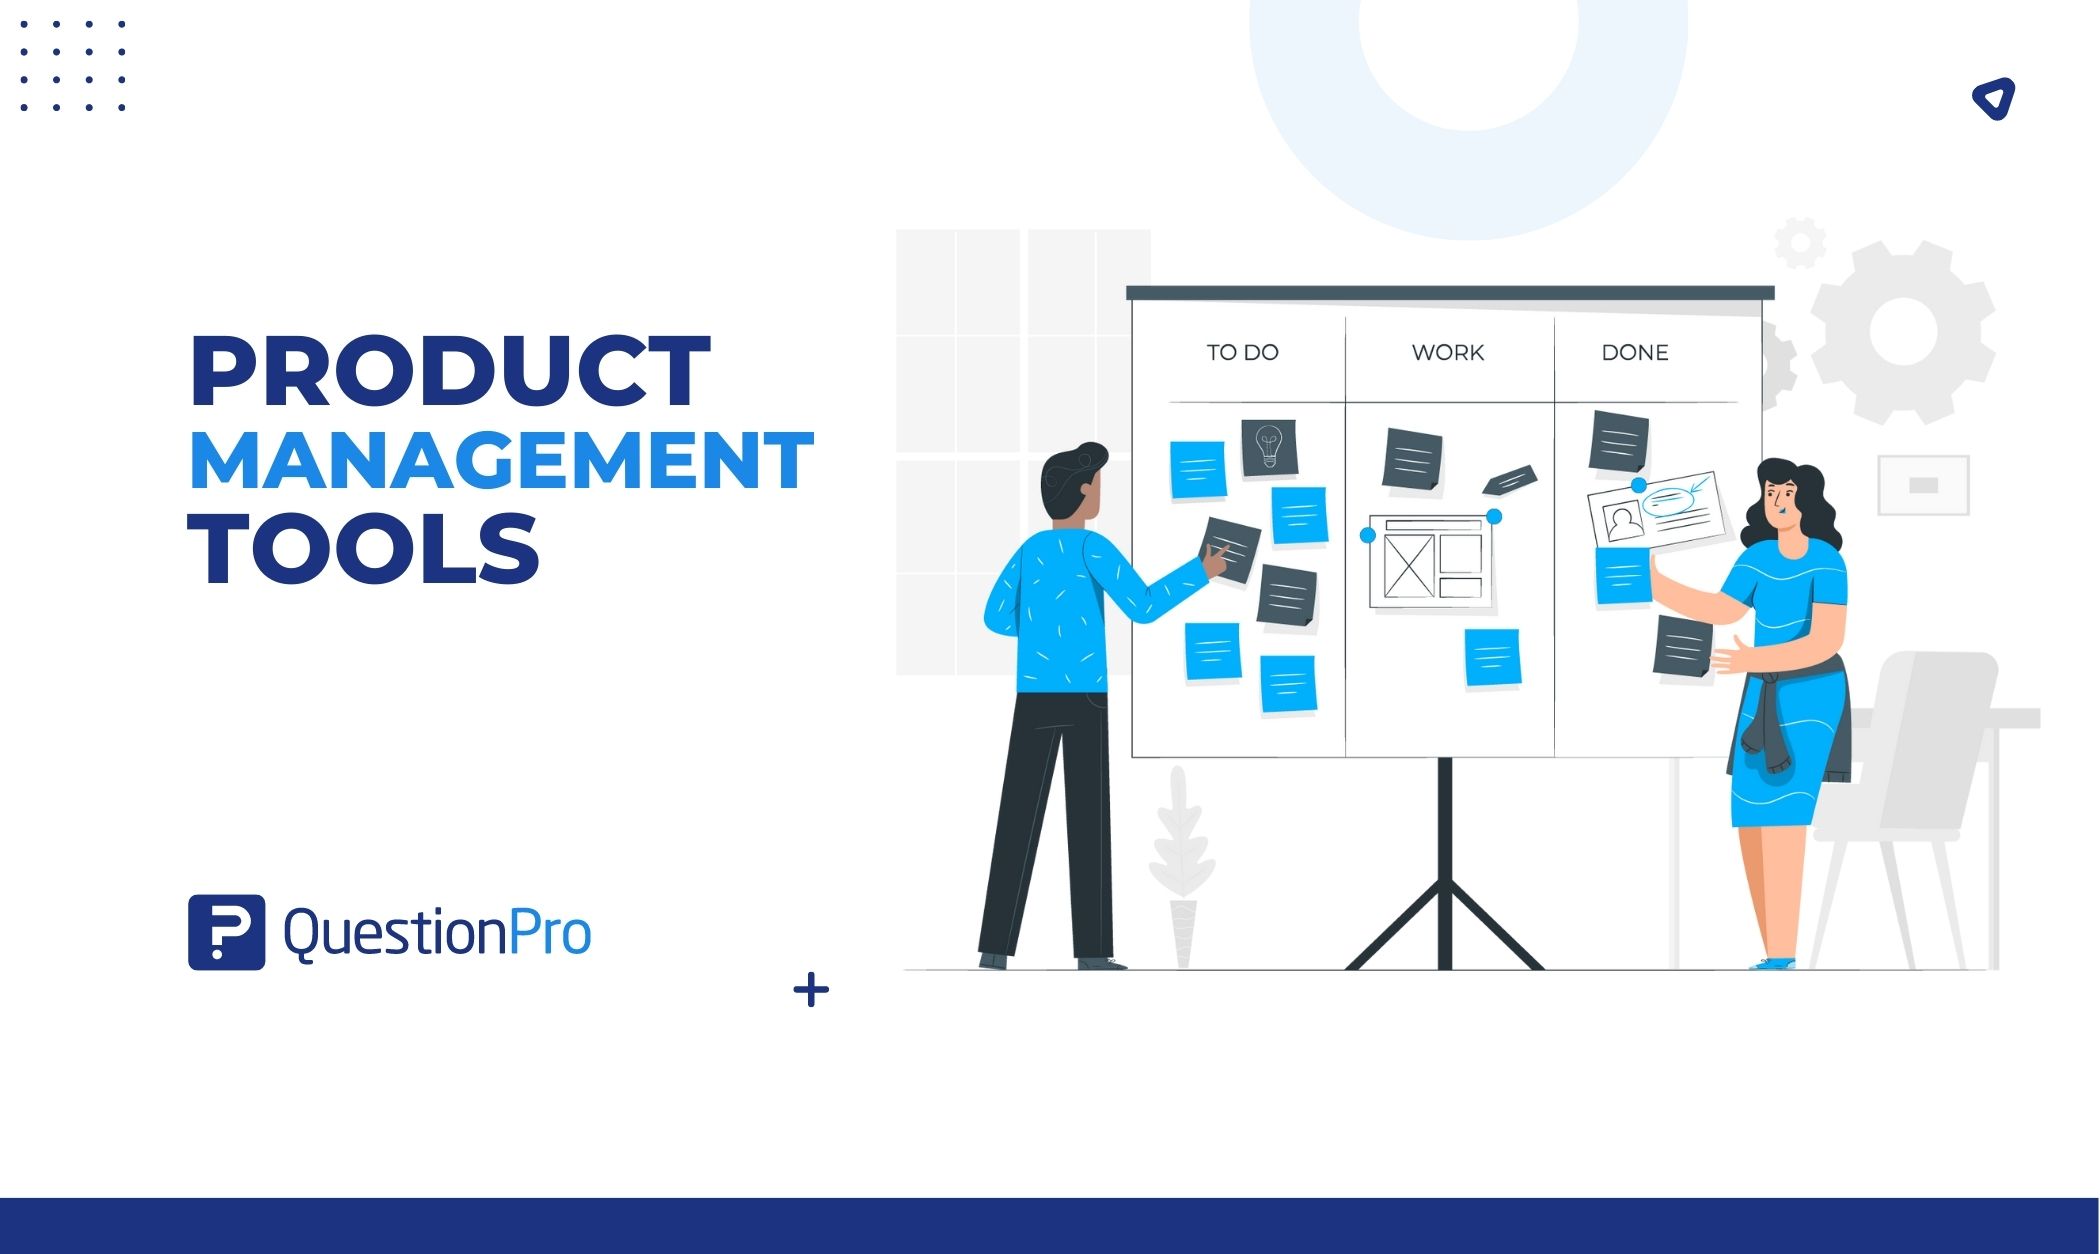 Product management tools help you create and share product roadmaps. This blog will show you 12 best tools for product management to choose.